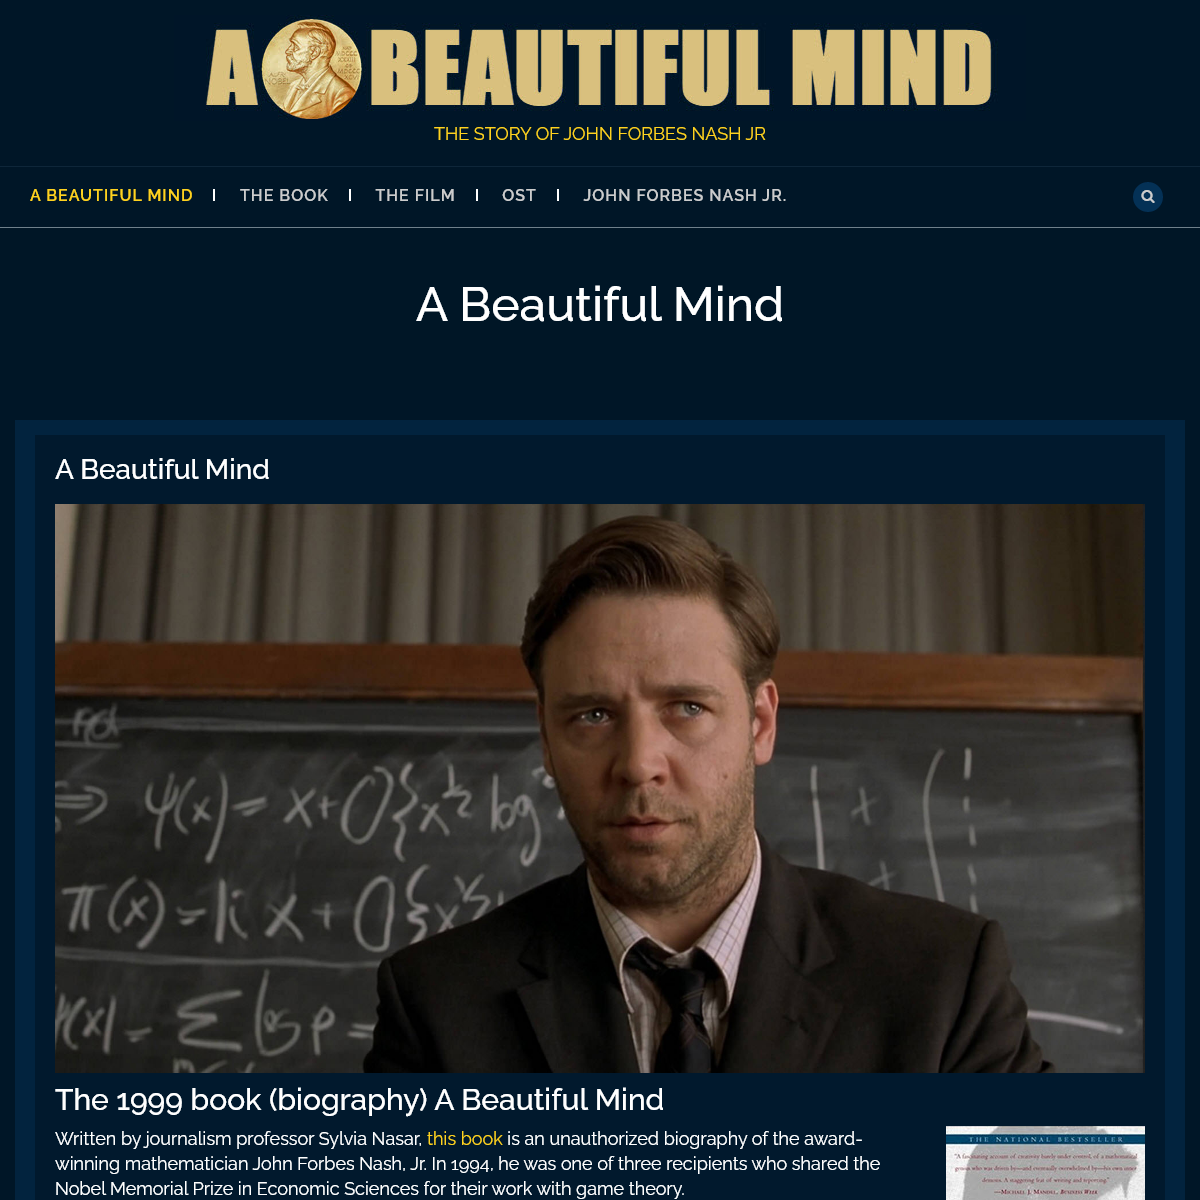 A complete backup of abeautifulmind.com